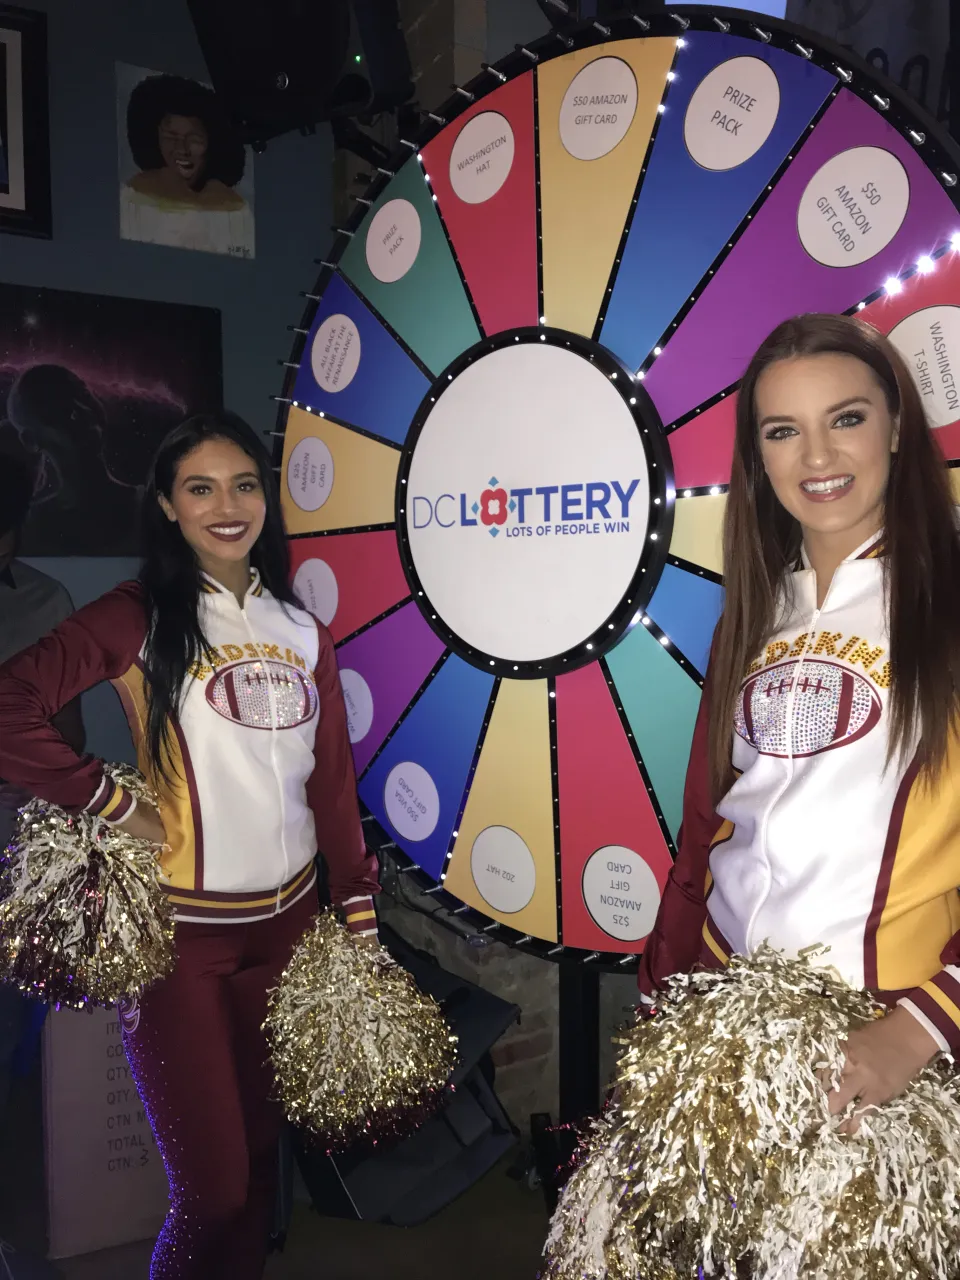 Cheerleaders posing in front of the giant DC Lottery prize wheel